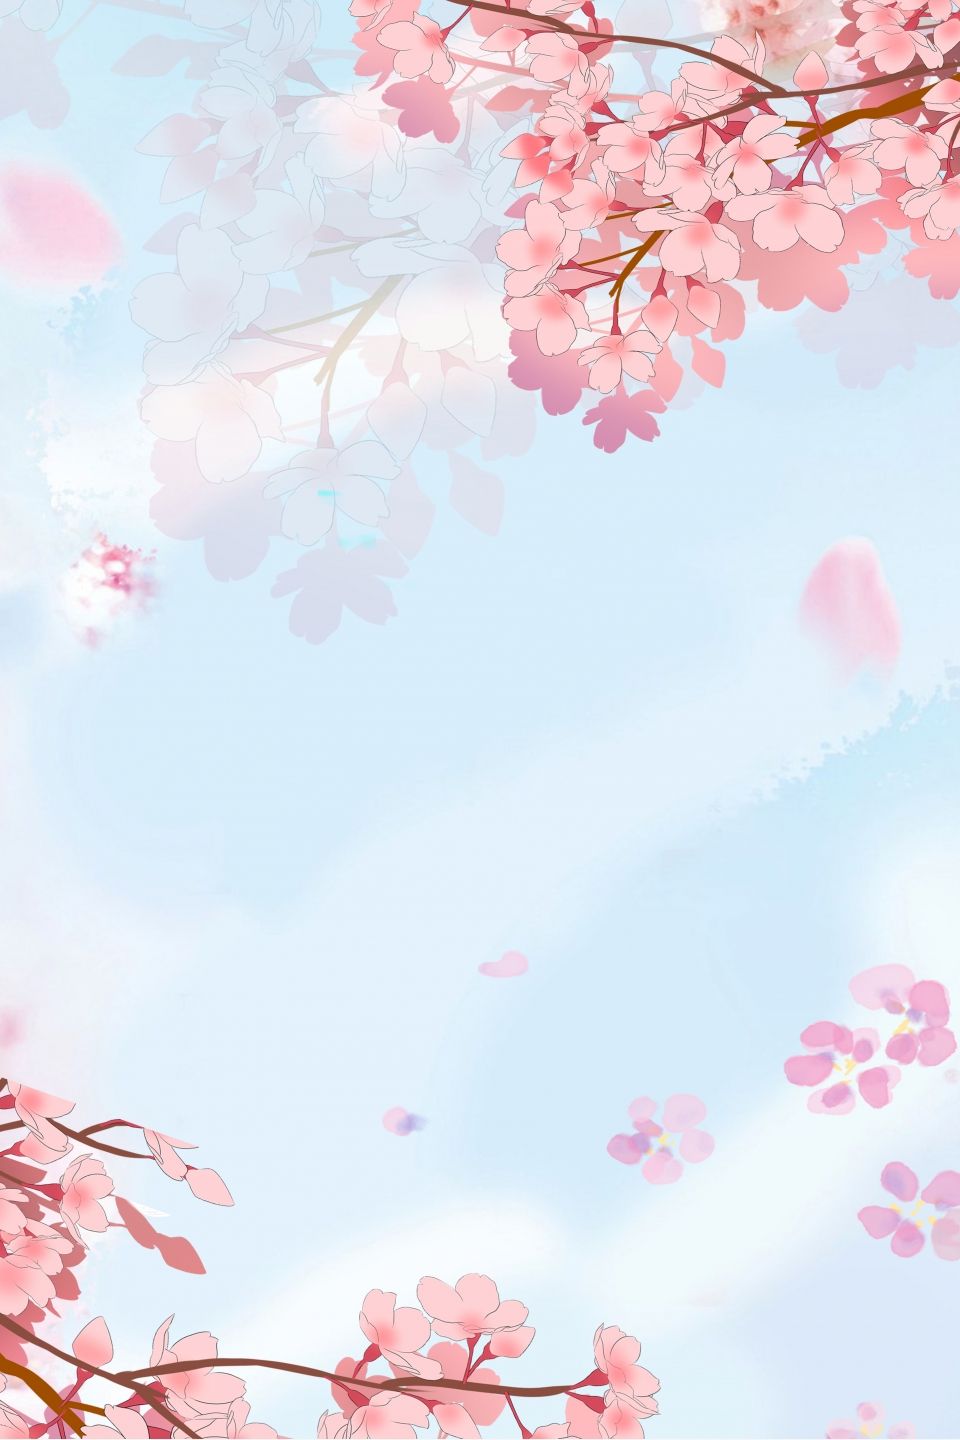 Cherry Blossom Background Photo, Vectors and PSD Files for Free Download